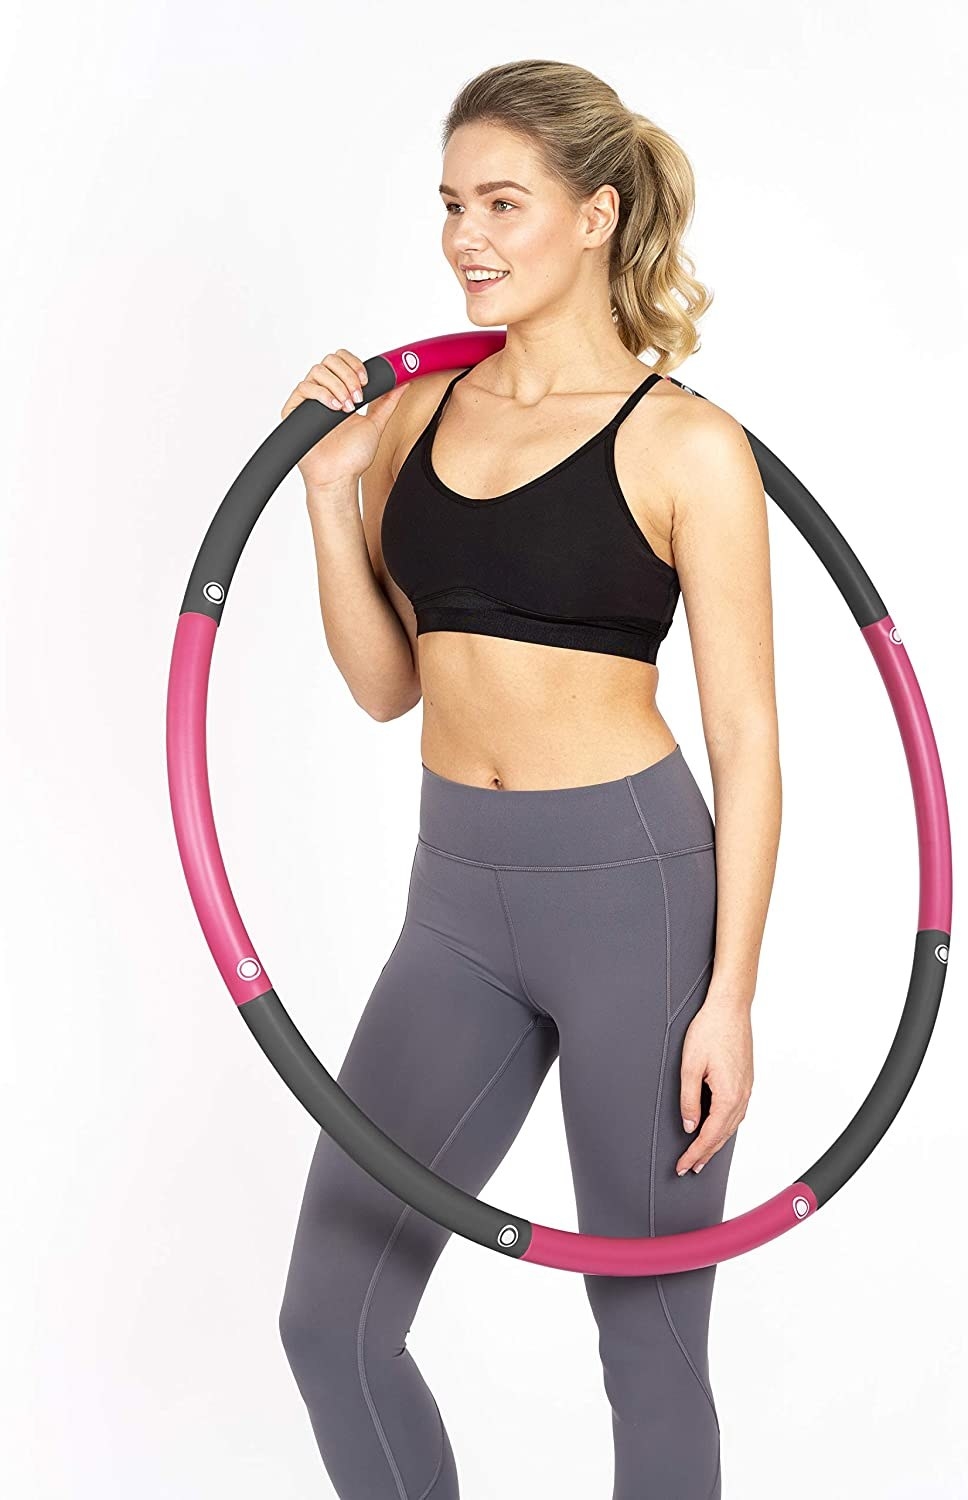 a model holds the weighted hoola hoop